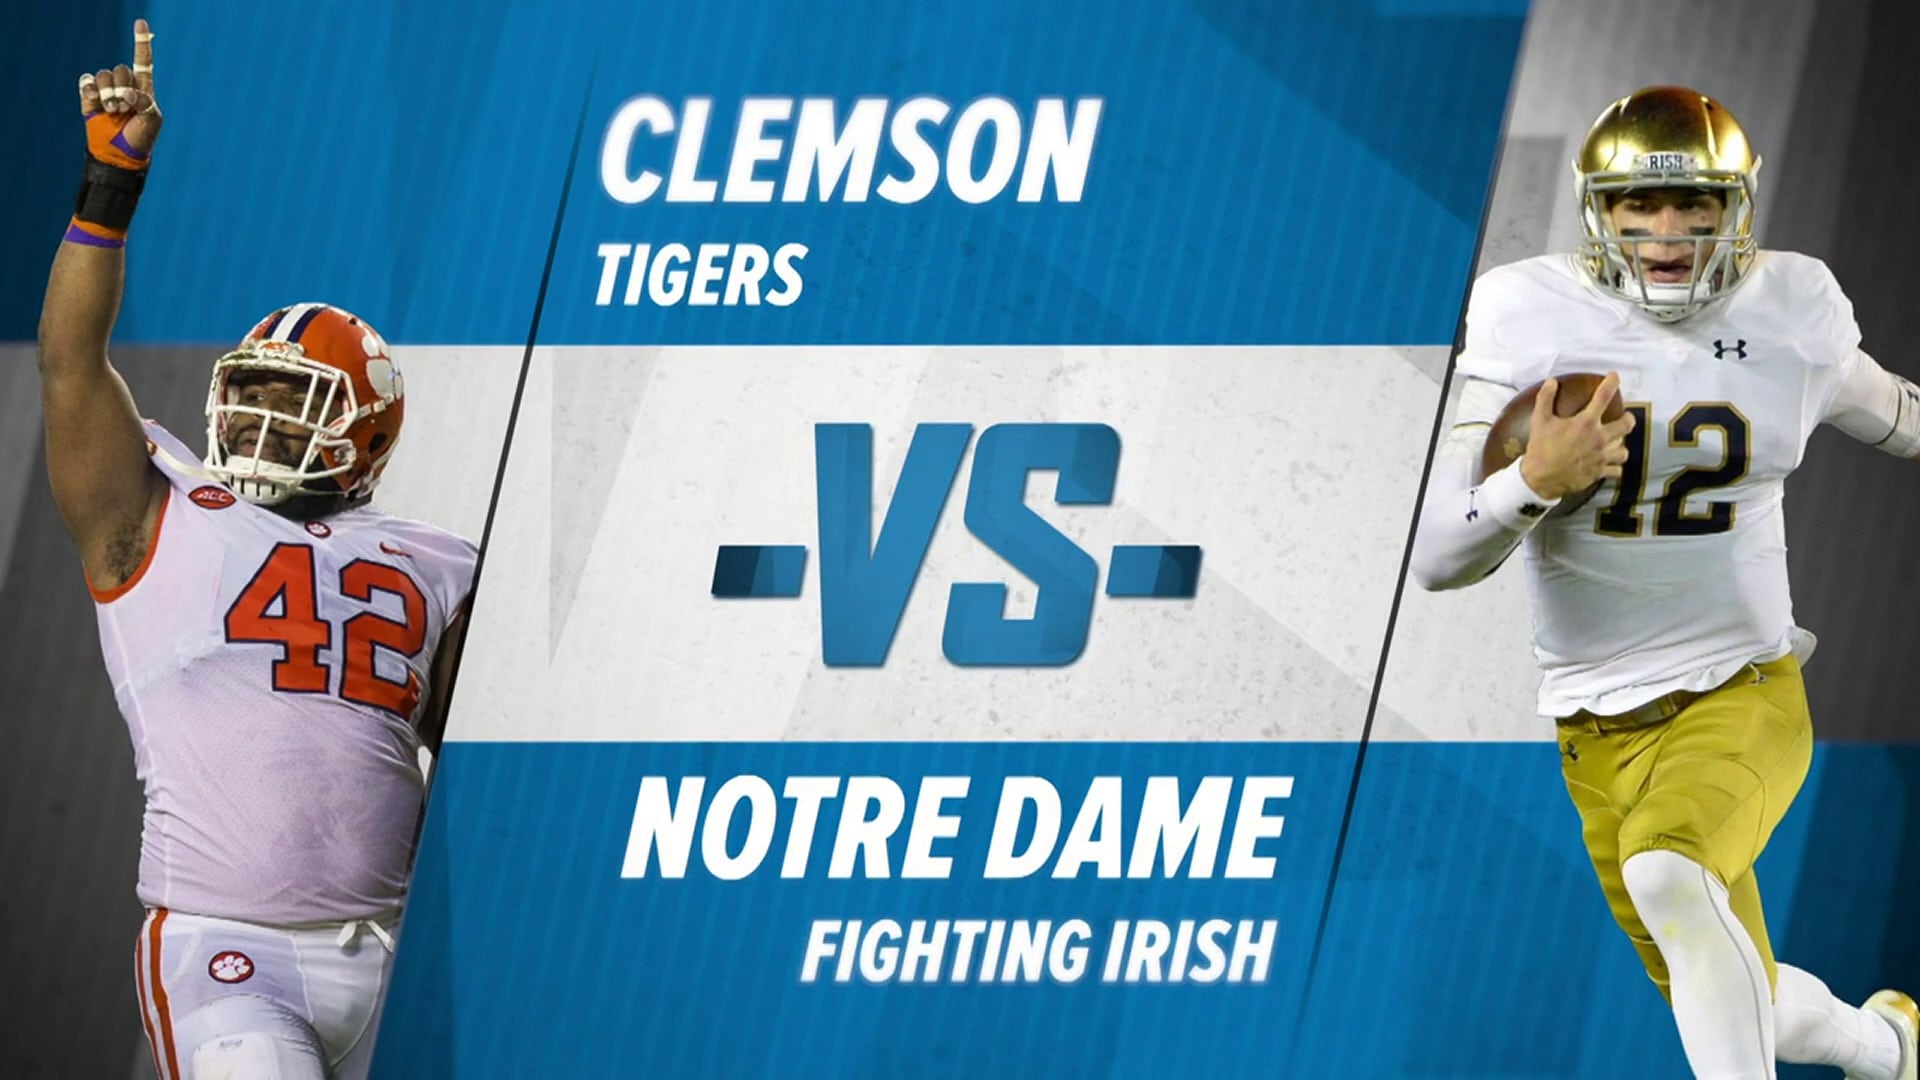 Clemson Tigers vs Notre Dame Fighting Irish Odds and Predictions